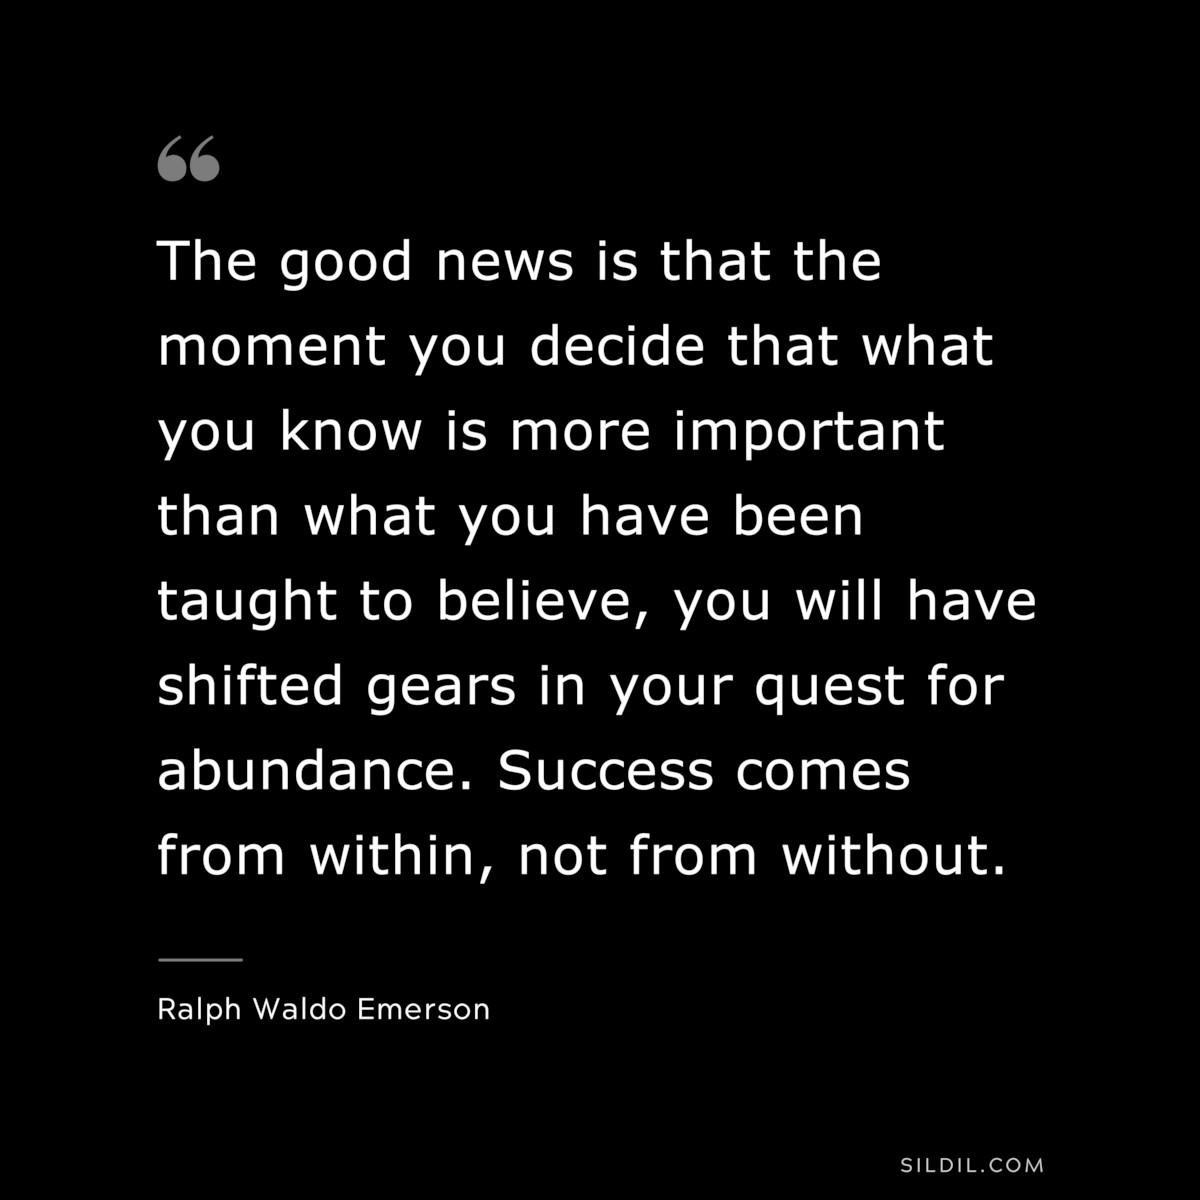 The good news is that the moment you decide that what you know is more important than what you have been taught to believe, you will have shifted gears in your quest for abundance. Success comes from within, not from without. — Ralph Waldo Emerson